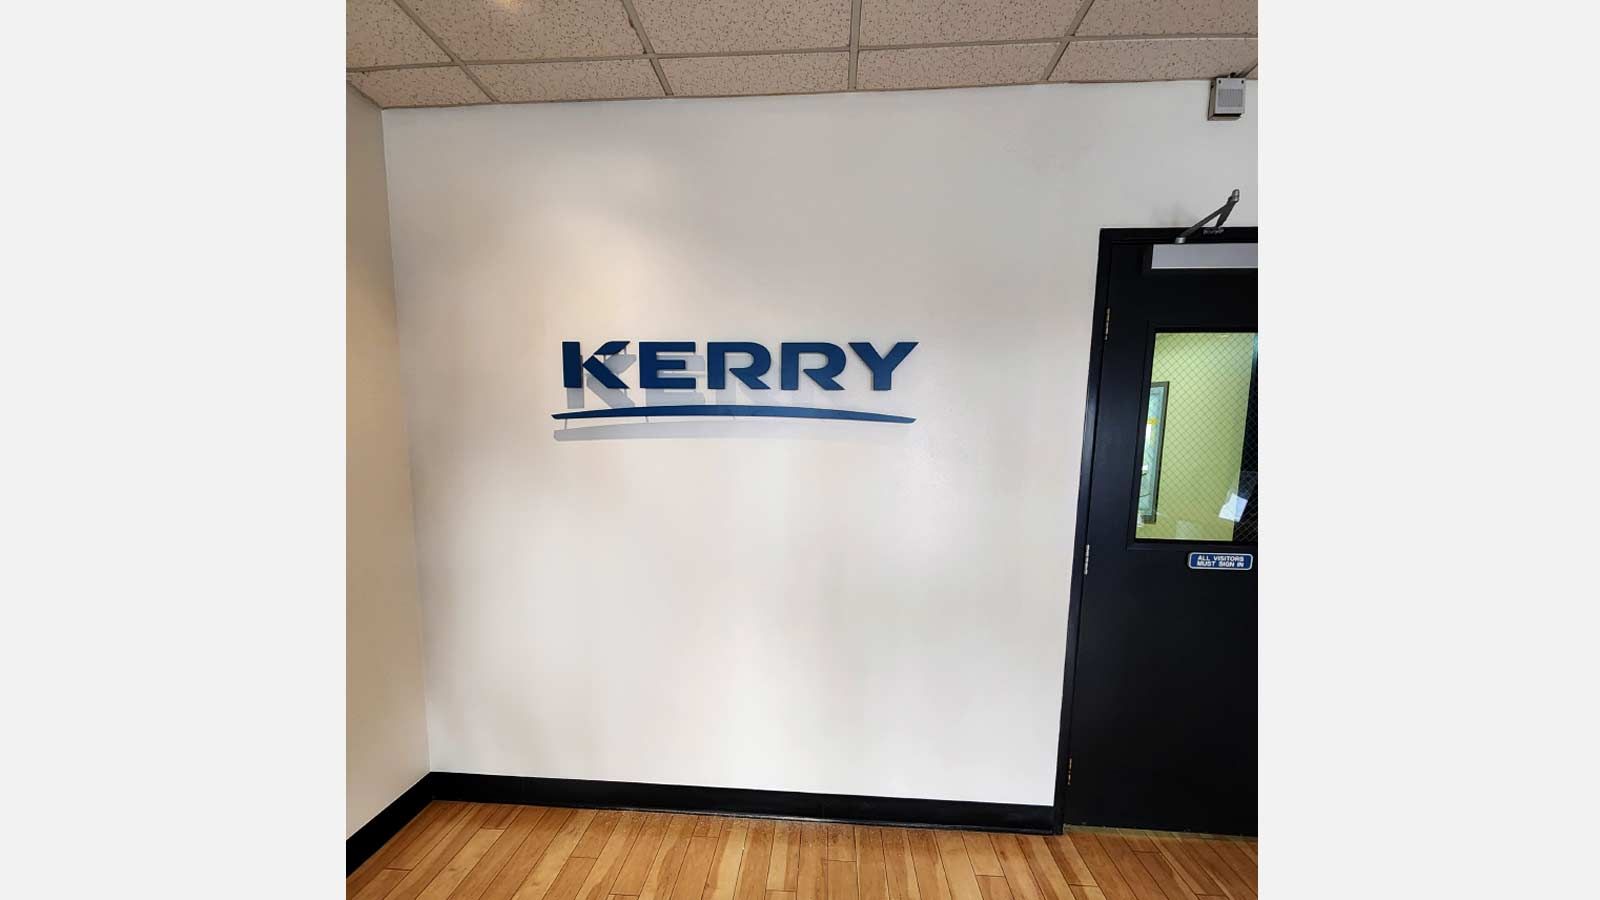 Kerry office sign mounted on the wall